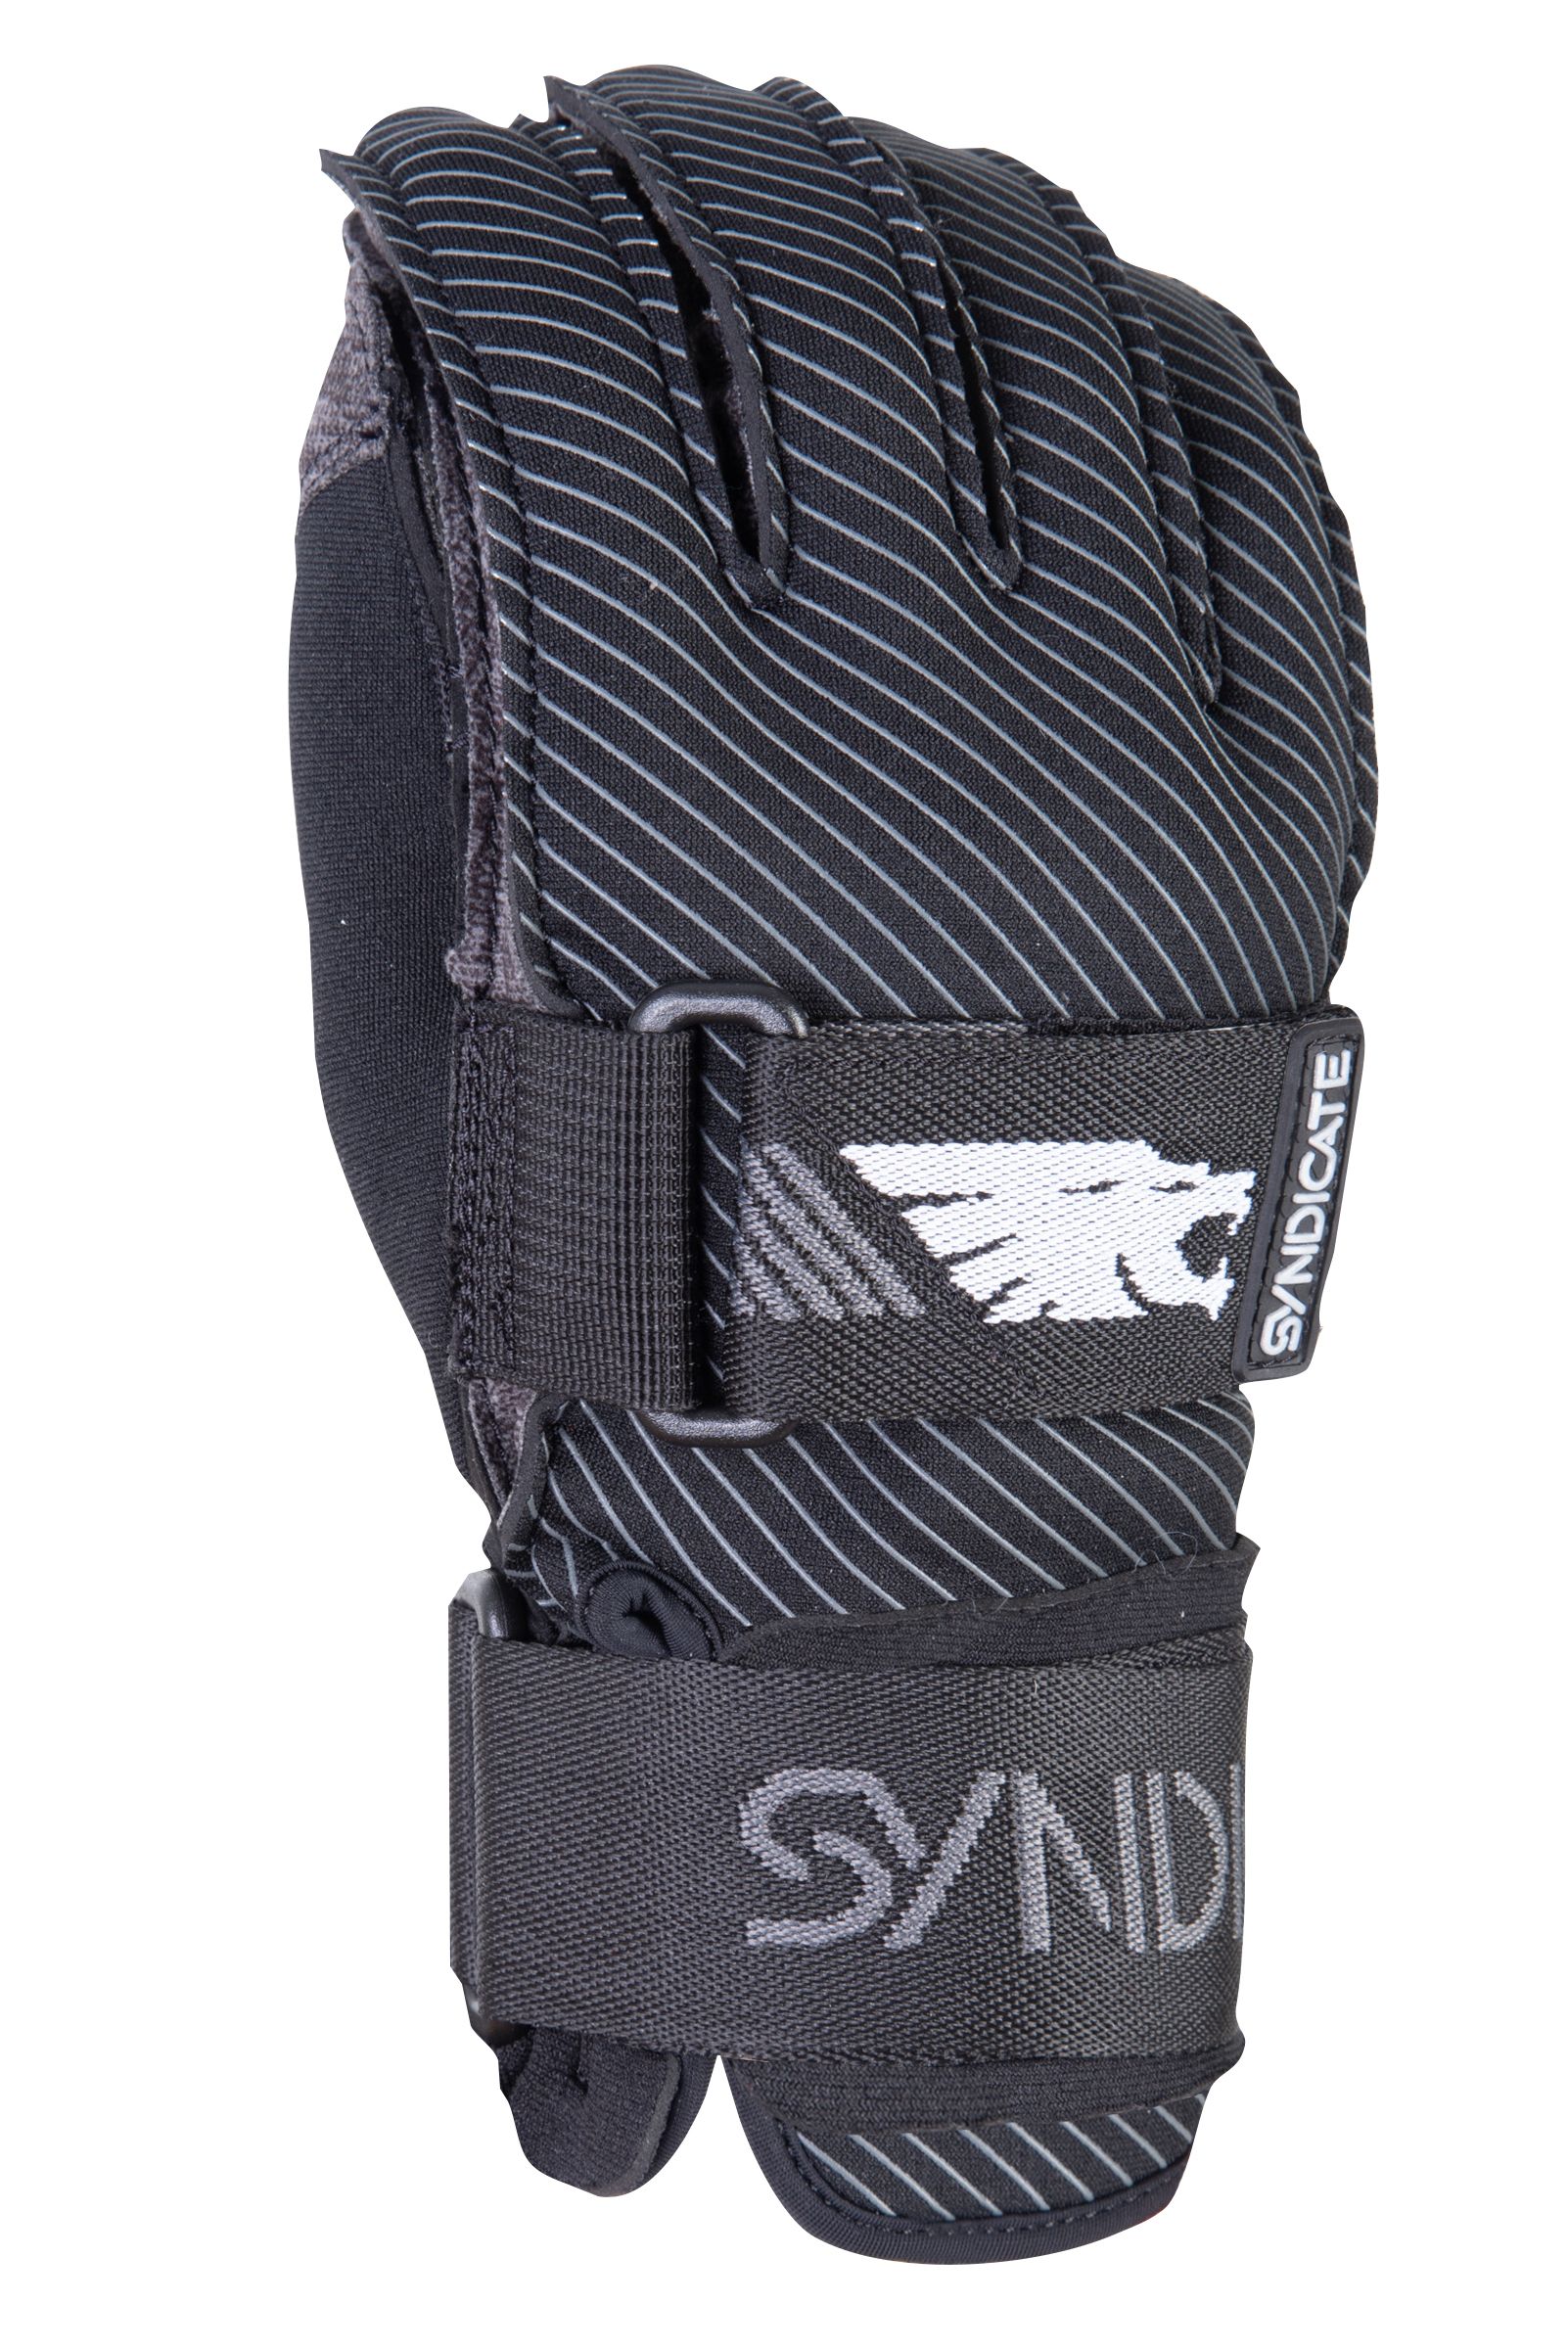 HO SYNDICATE GLOVE 41 TAIL - INSIDE OUT GLOVE - S